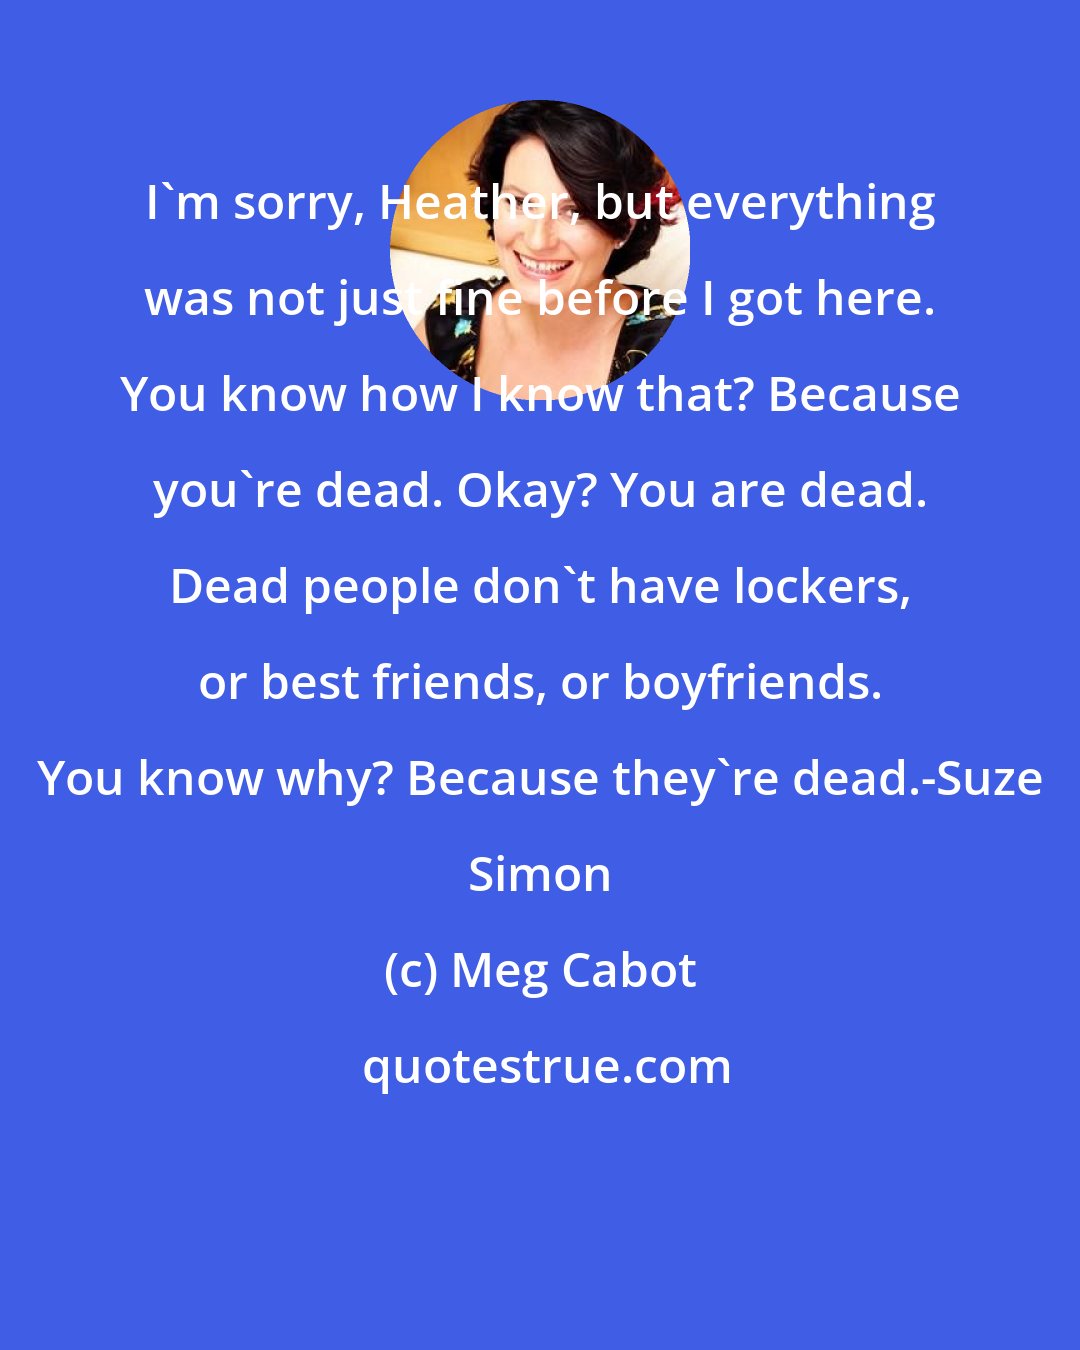 Meg Cabot: I'm sorry, Heather, but everything was not just fine before I got here. You know how I know that? Because you're dead. Okay? You are dead. Dead people don't have lockers, or best friends, or boyfriends. You know why? Because they're dead.-Suze Simon